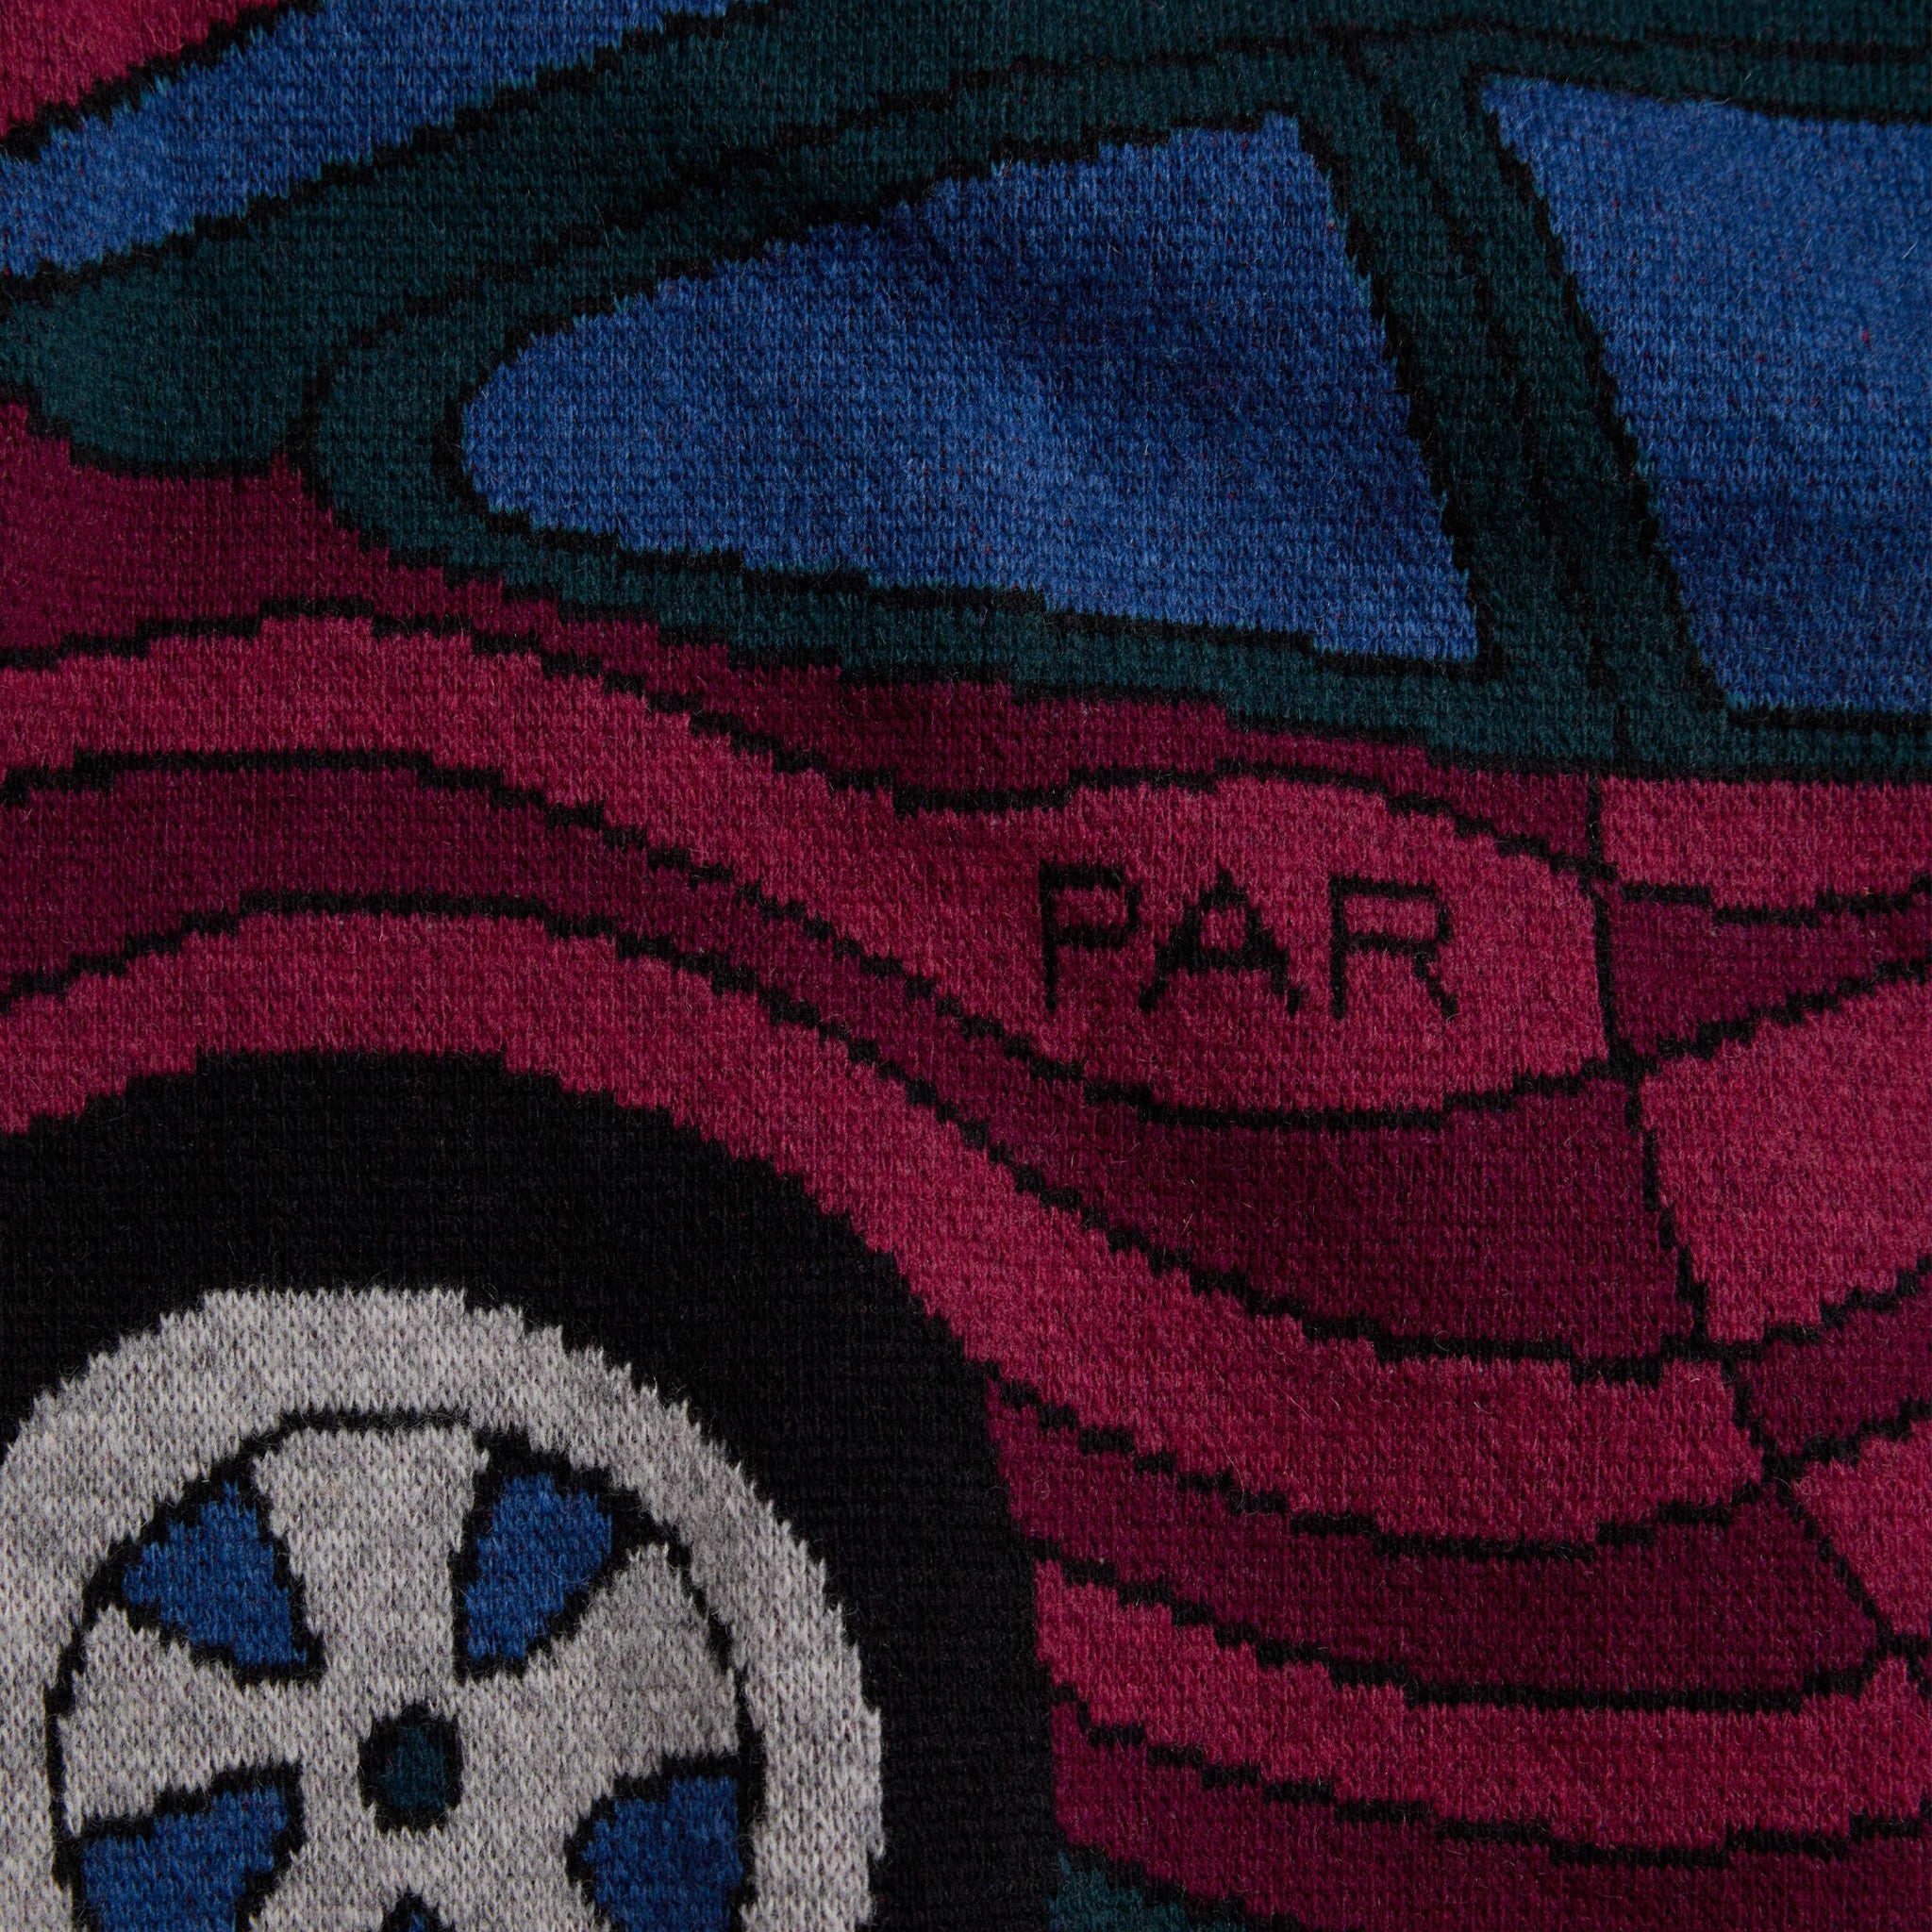 NO PARKING KNITTED CARDIGAN